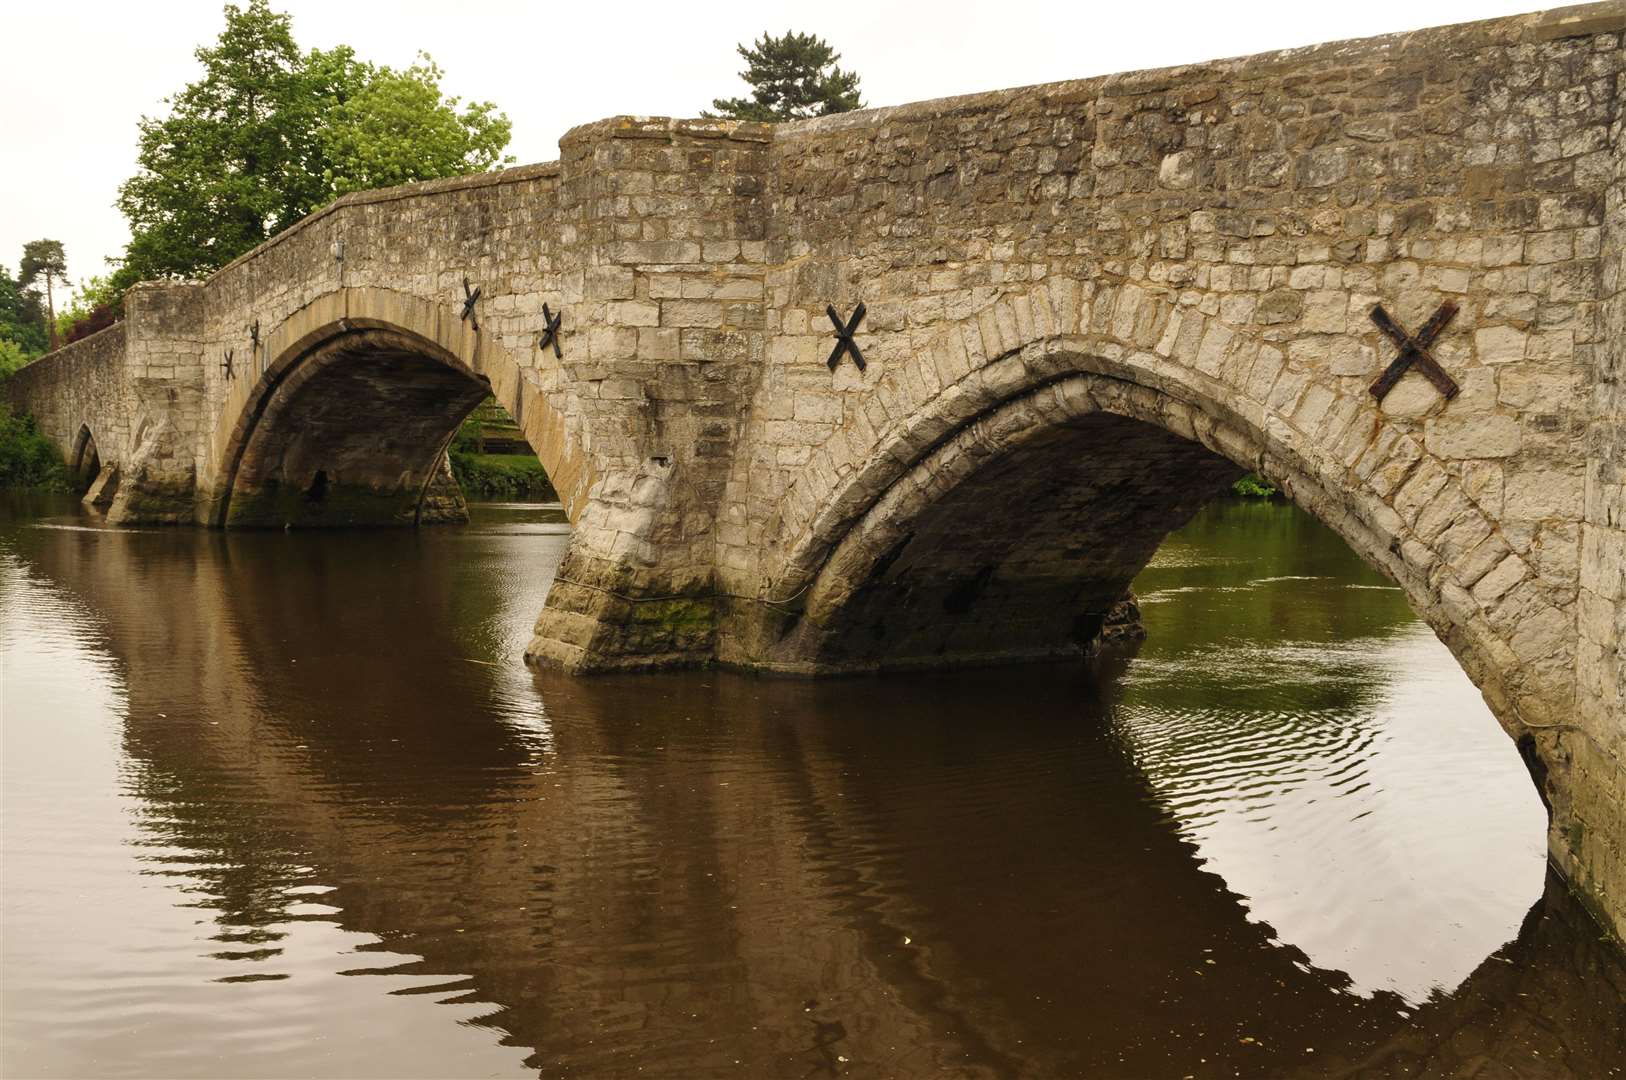 The incident happened near the old bridge in Aylesford